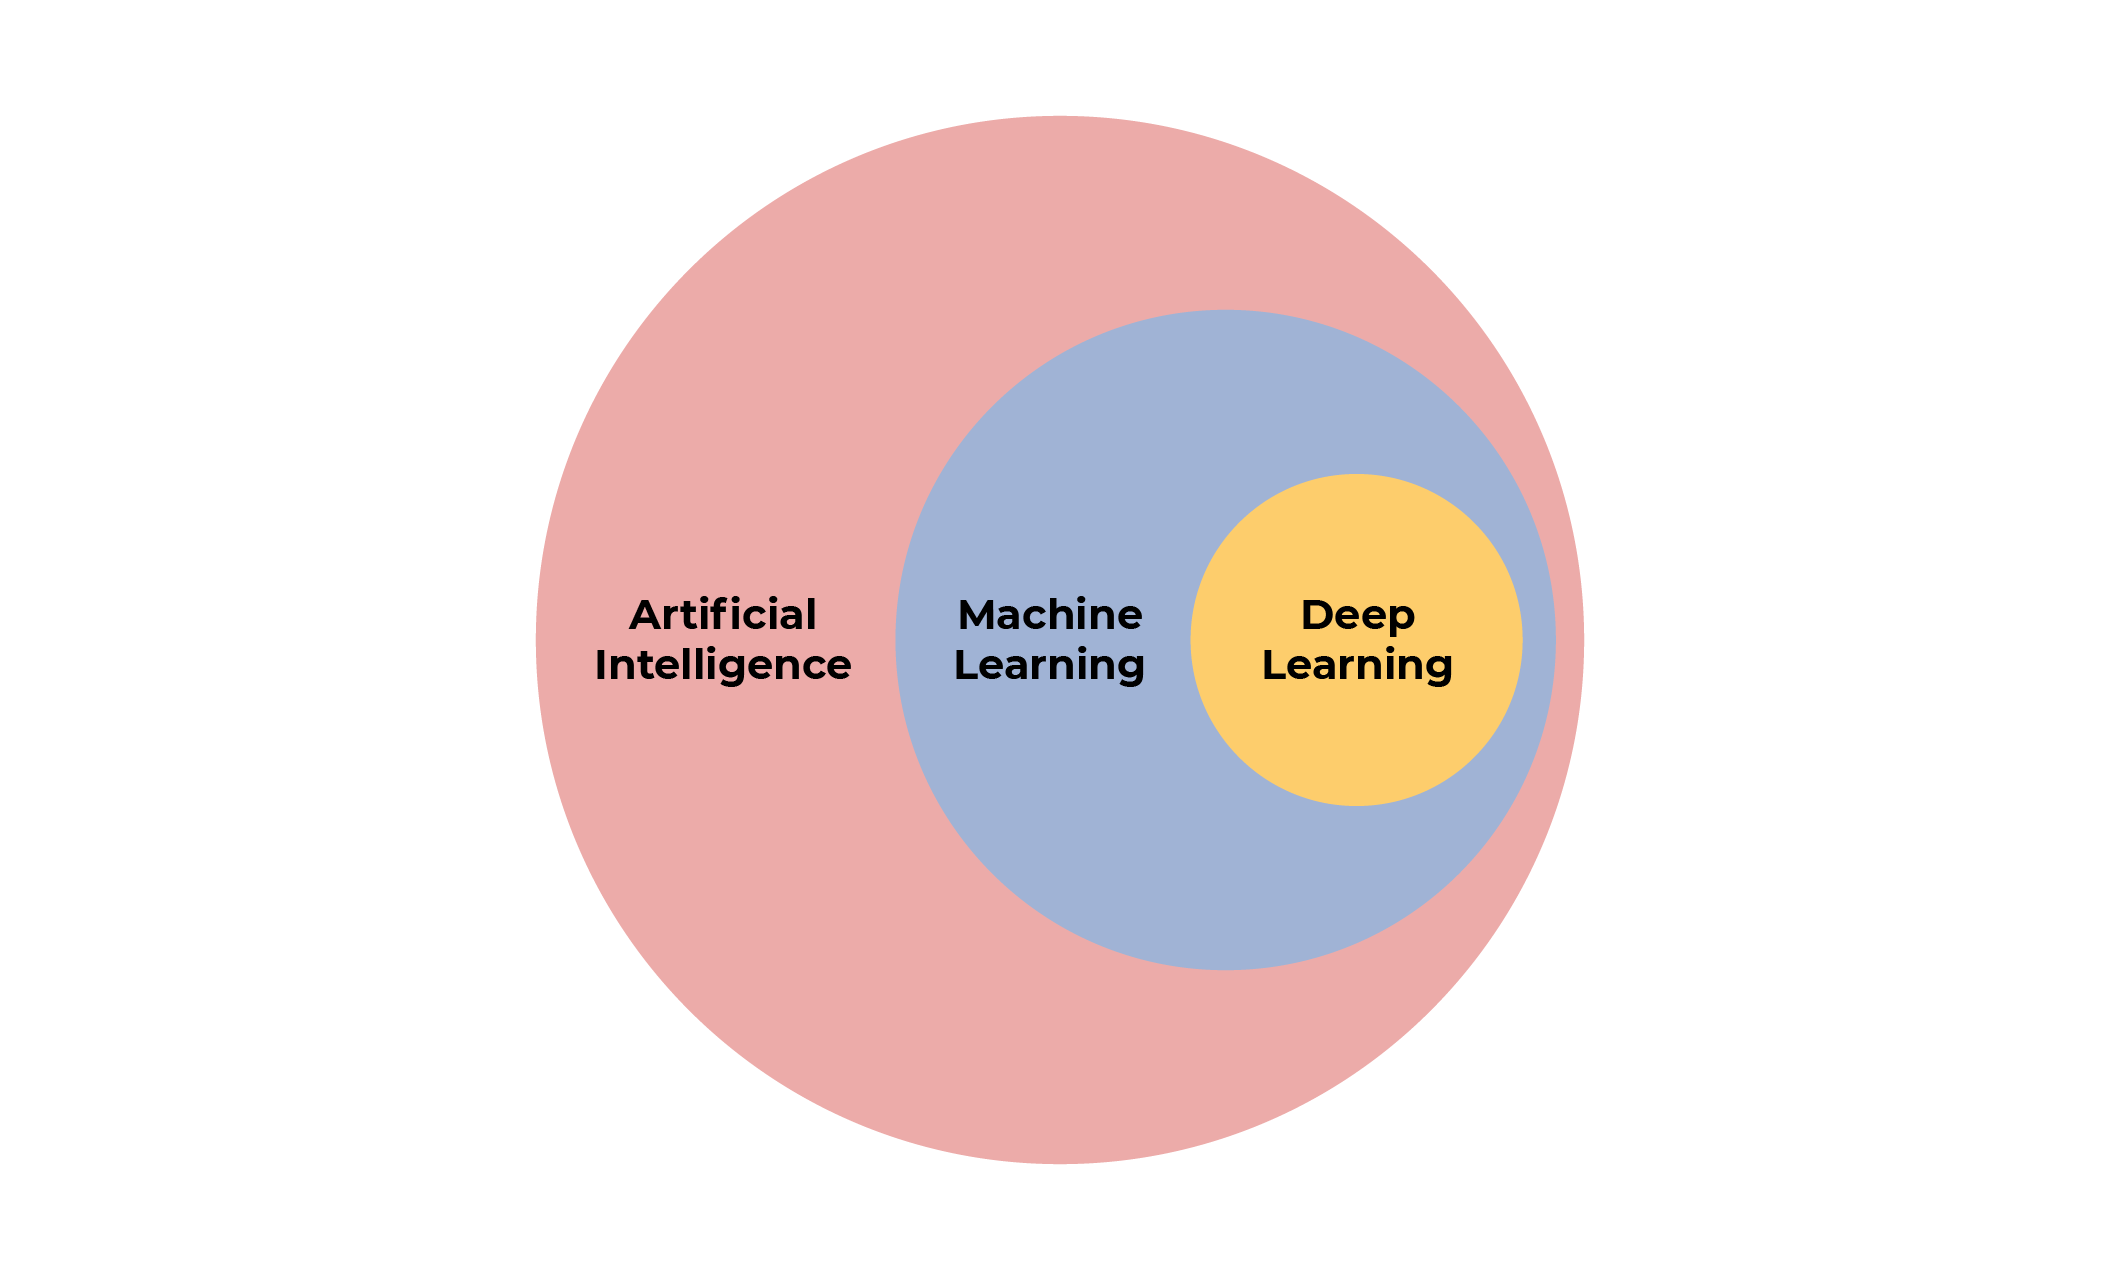 Diagram showing how deep learning is part of machine learning, which is part of AI.